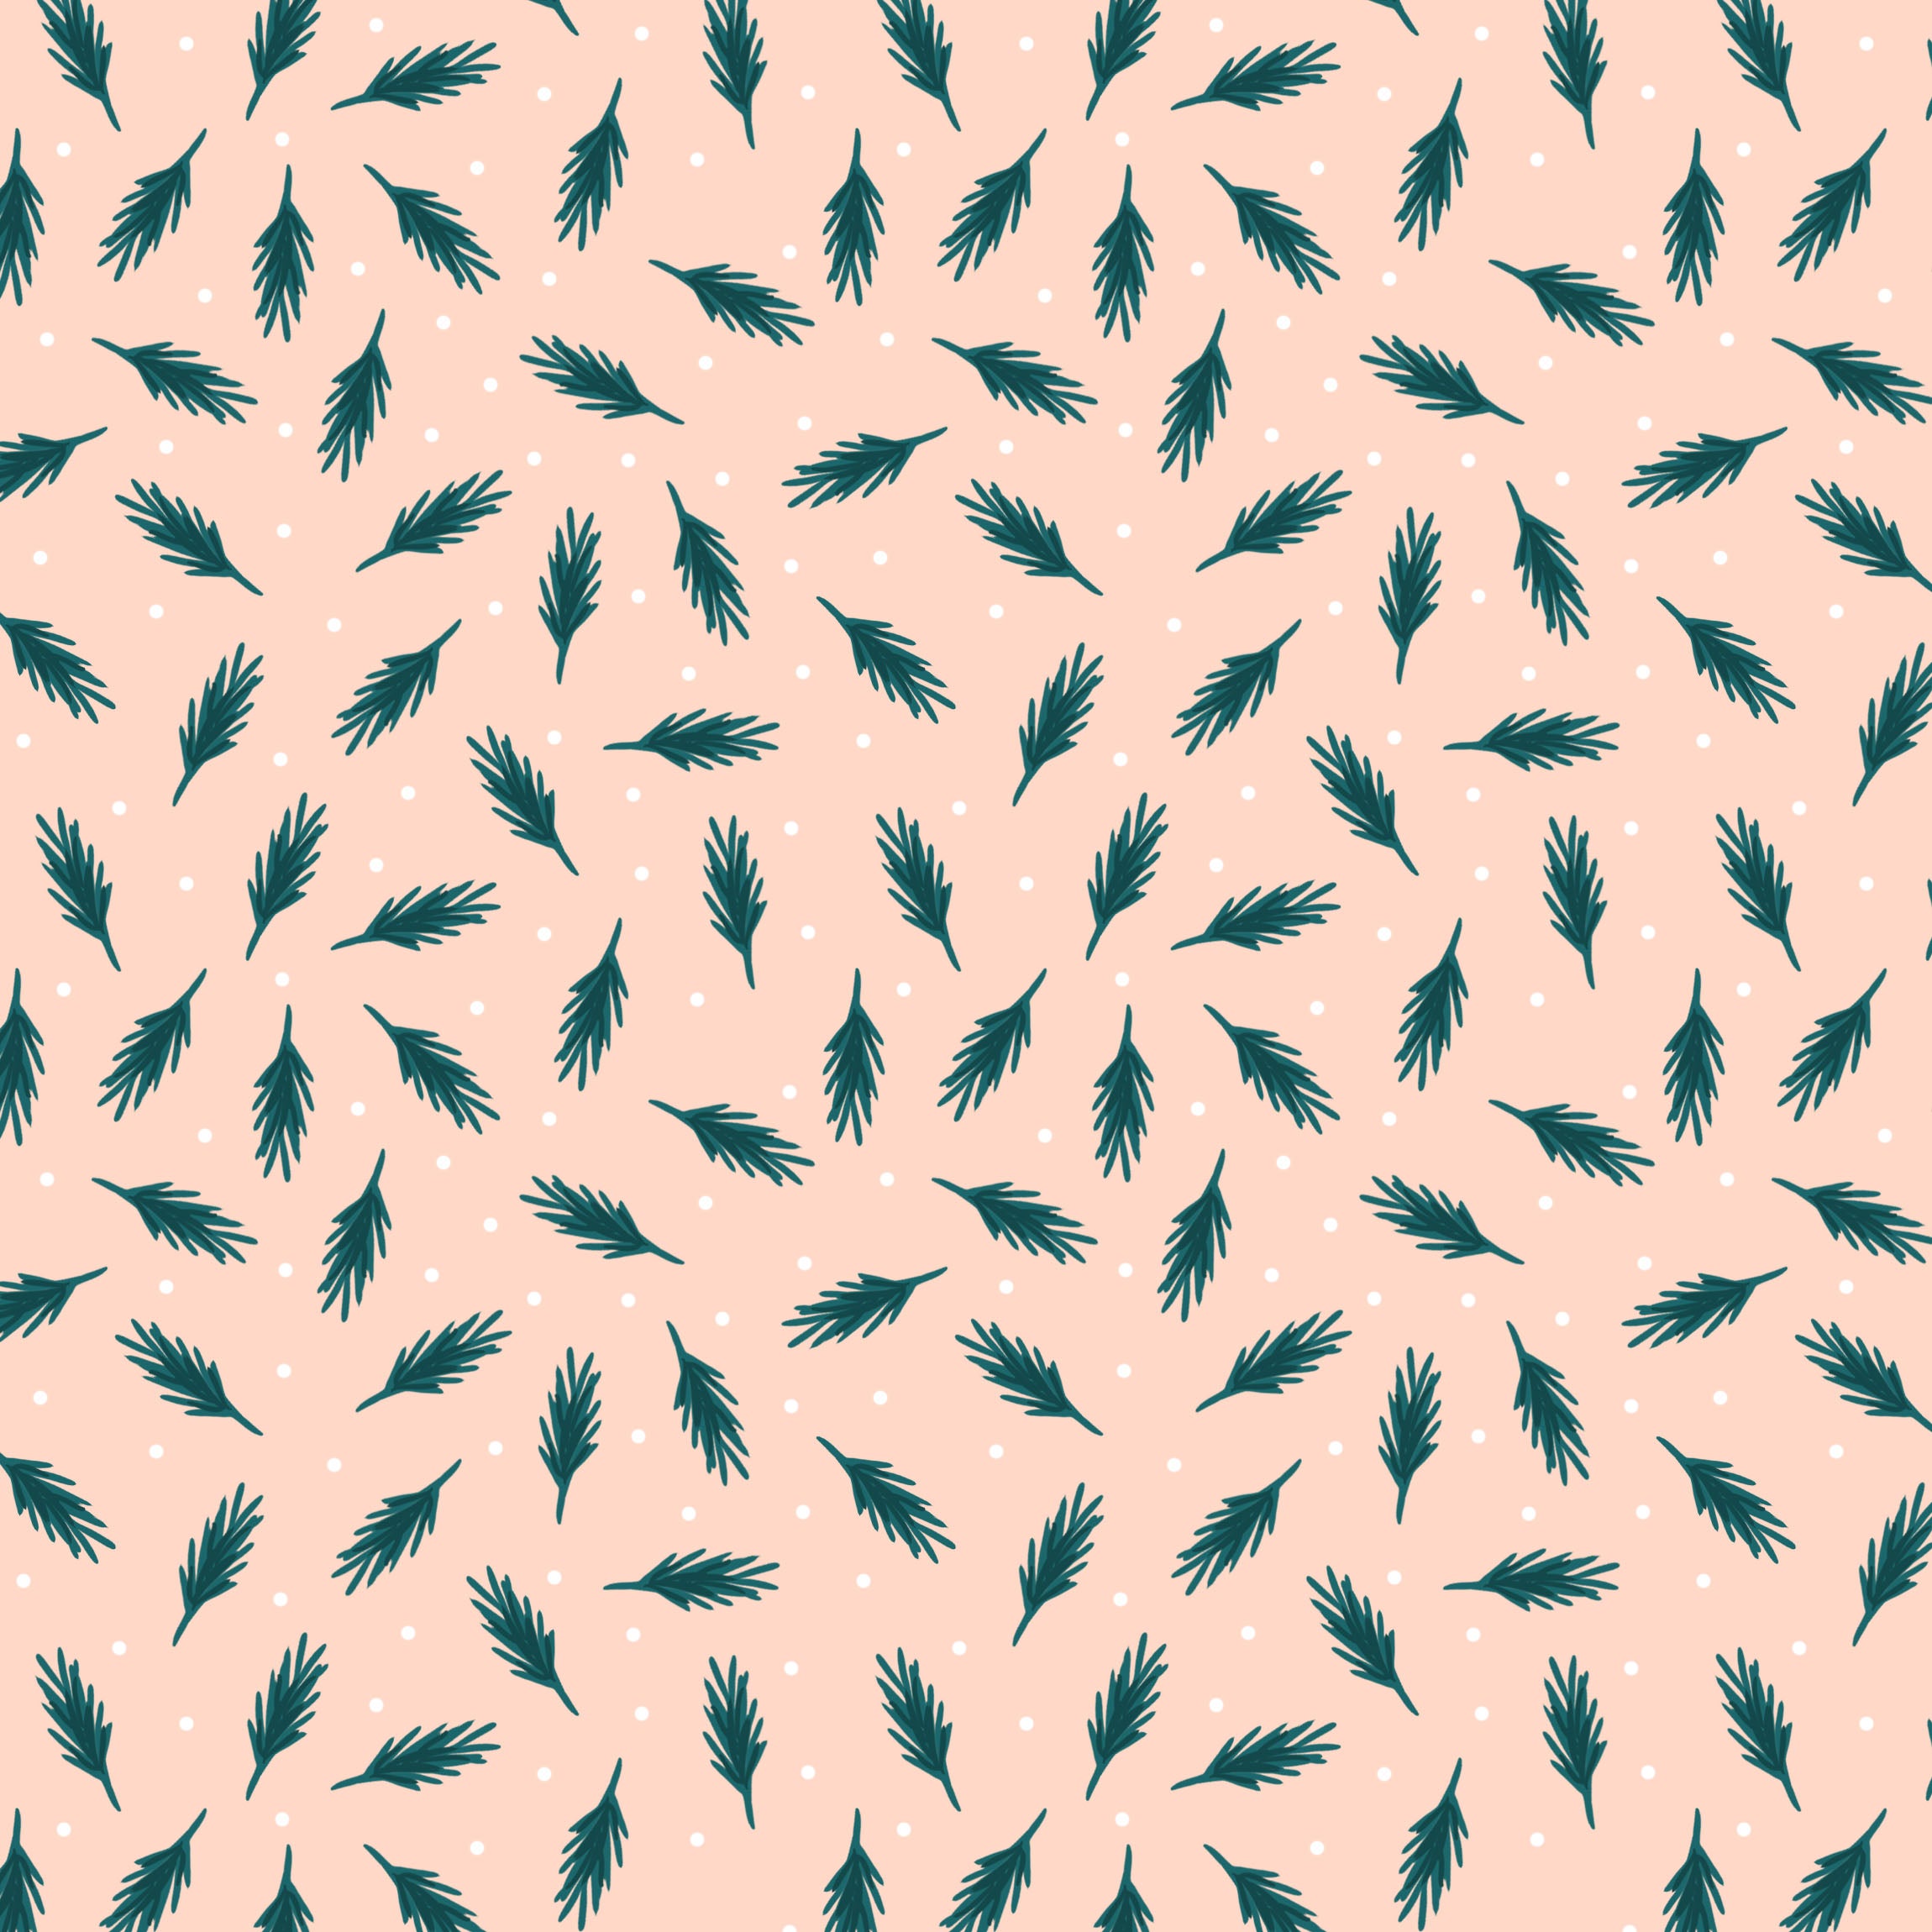 Chaffinch blender seamless repeat design by Tahlia Paige